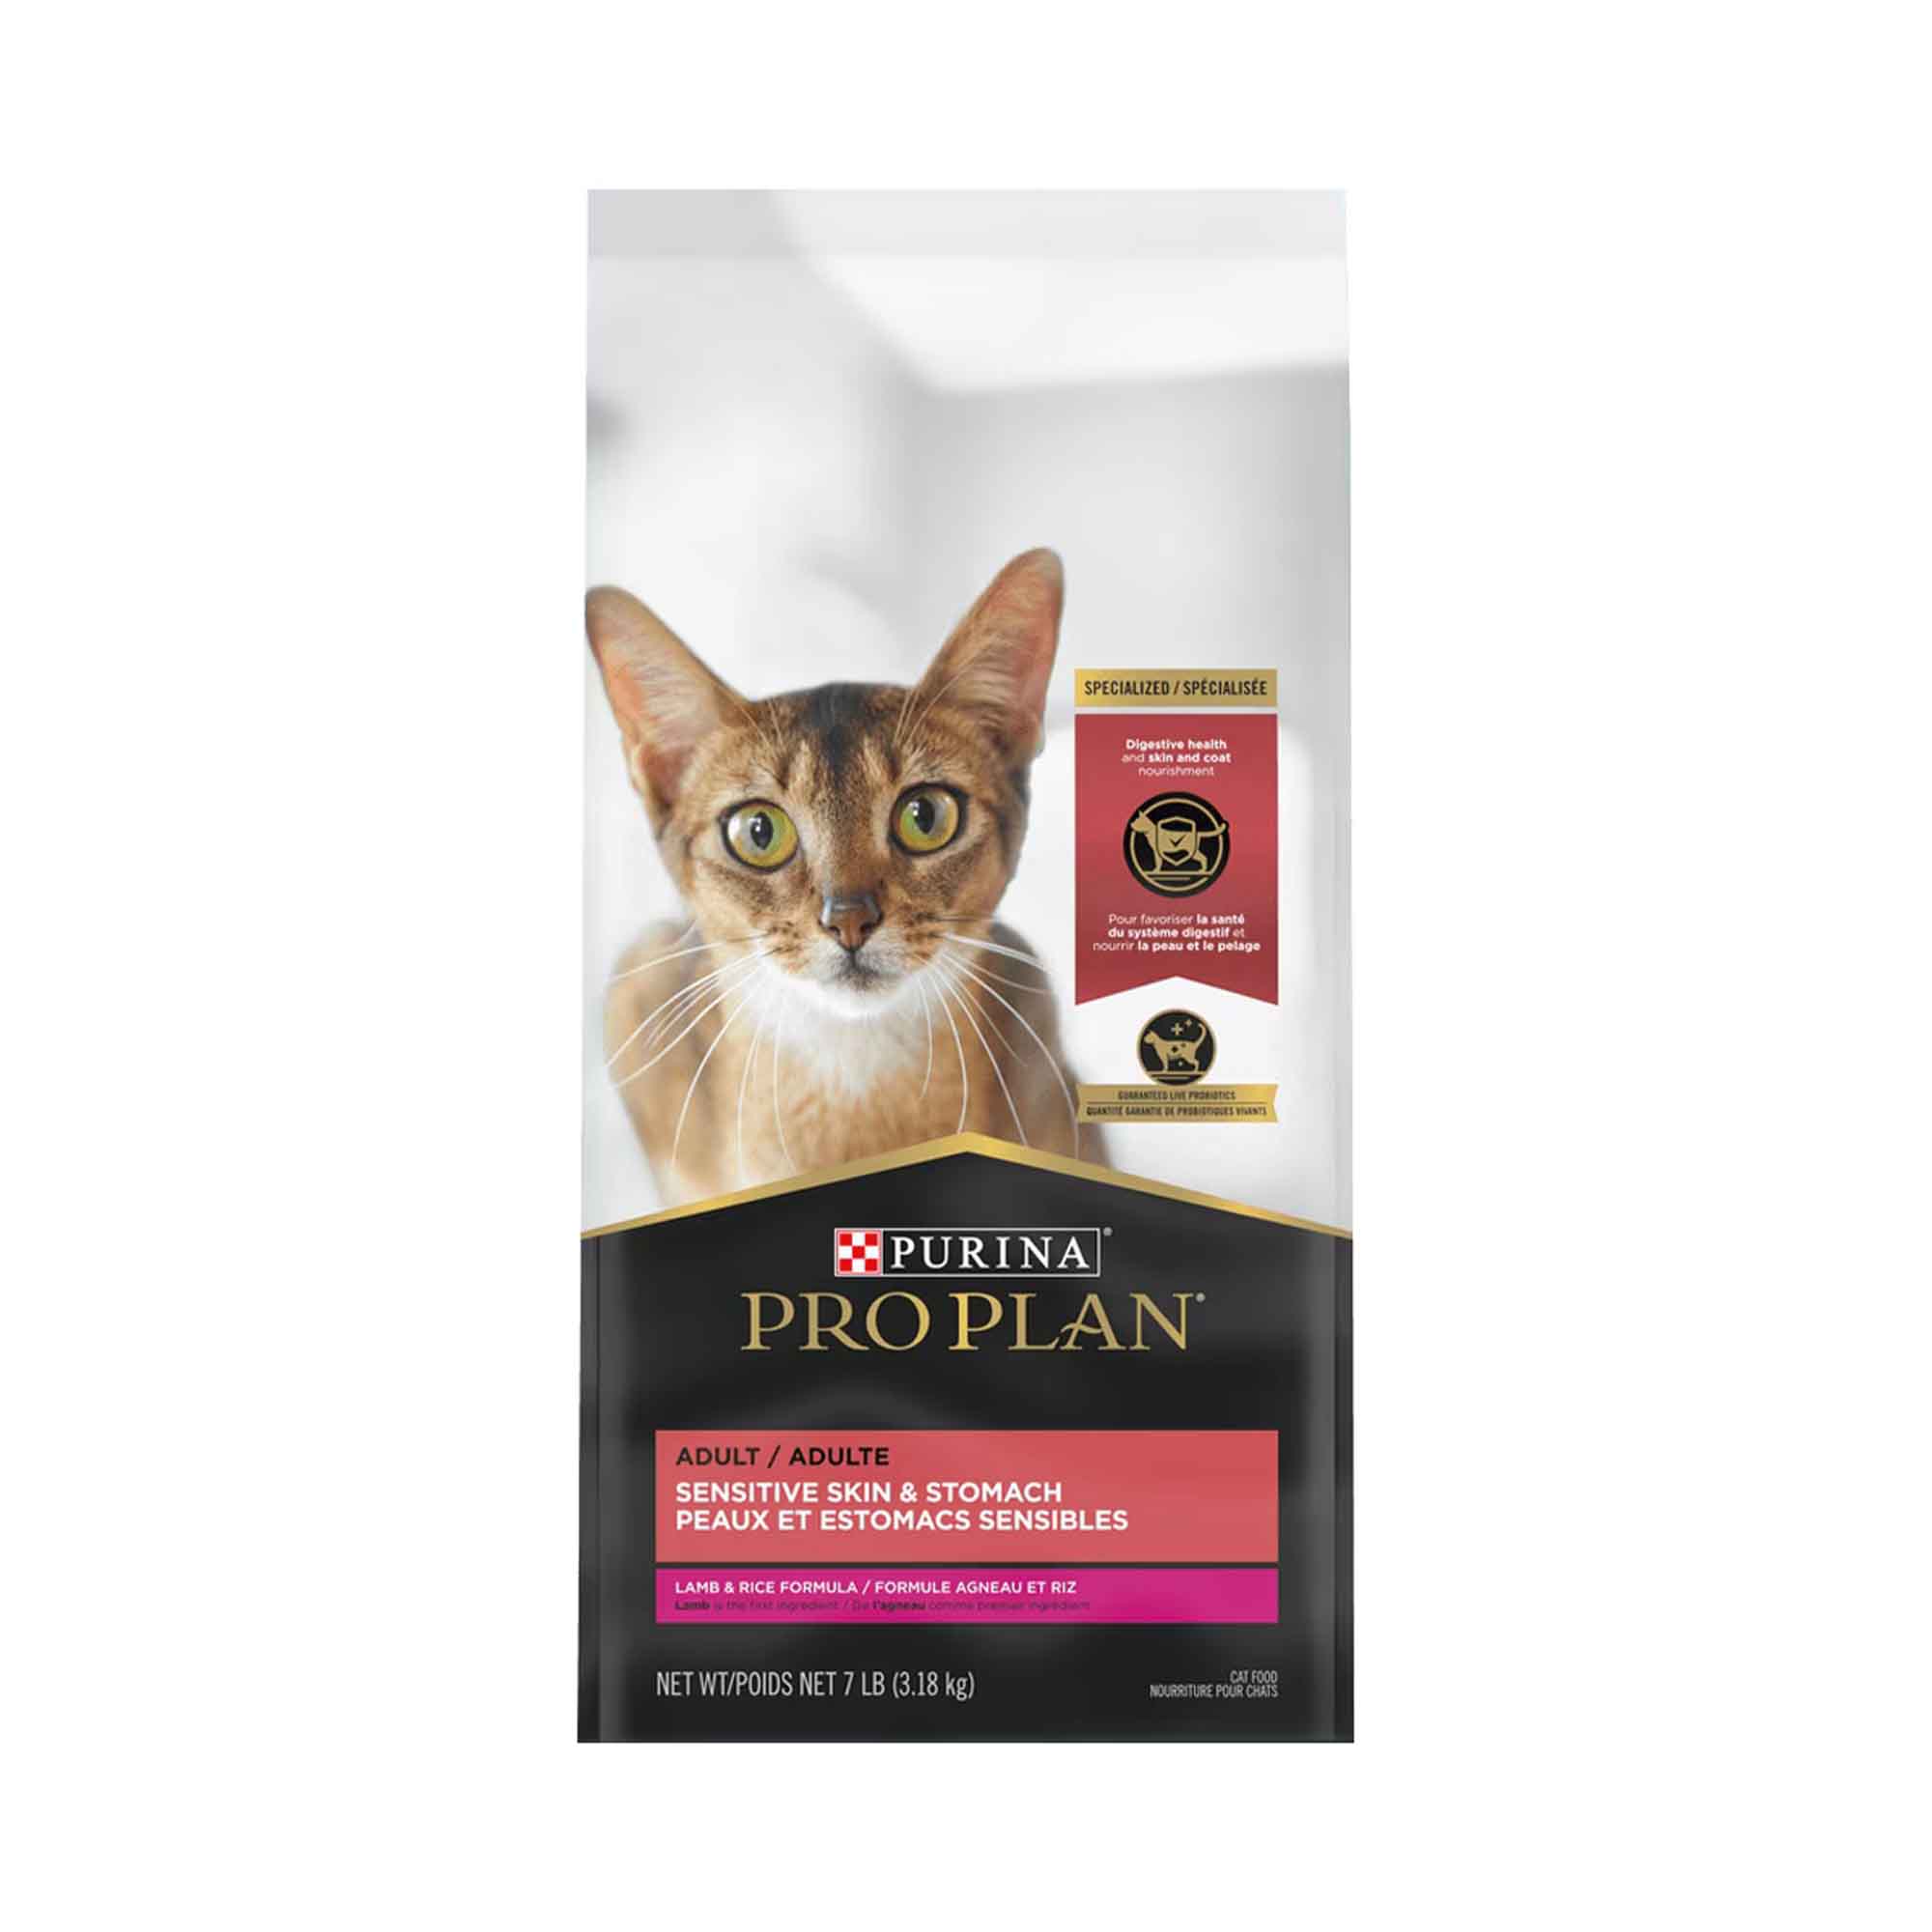 Pro Plan® adult sensitive skin and stomach, dry cat food - lamb and rice formula